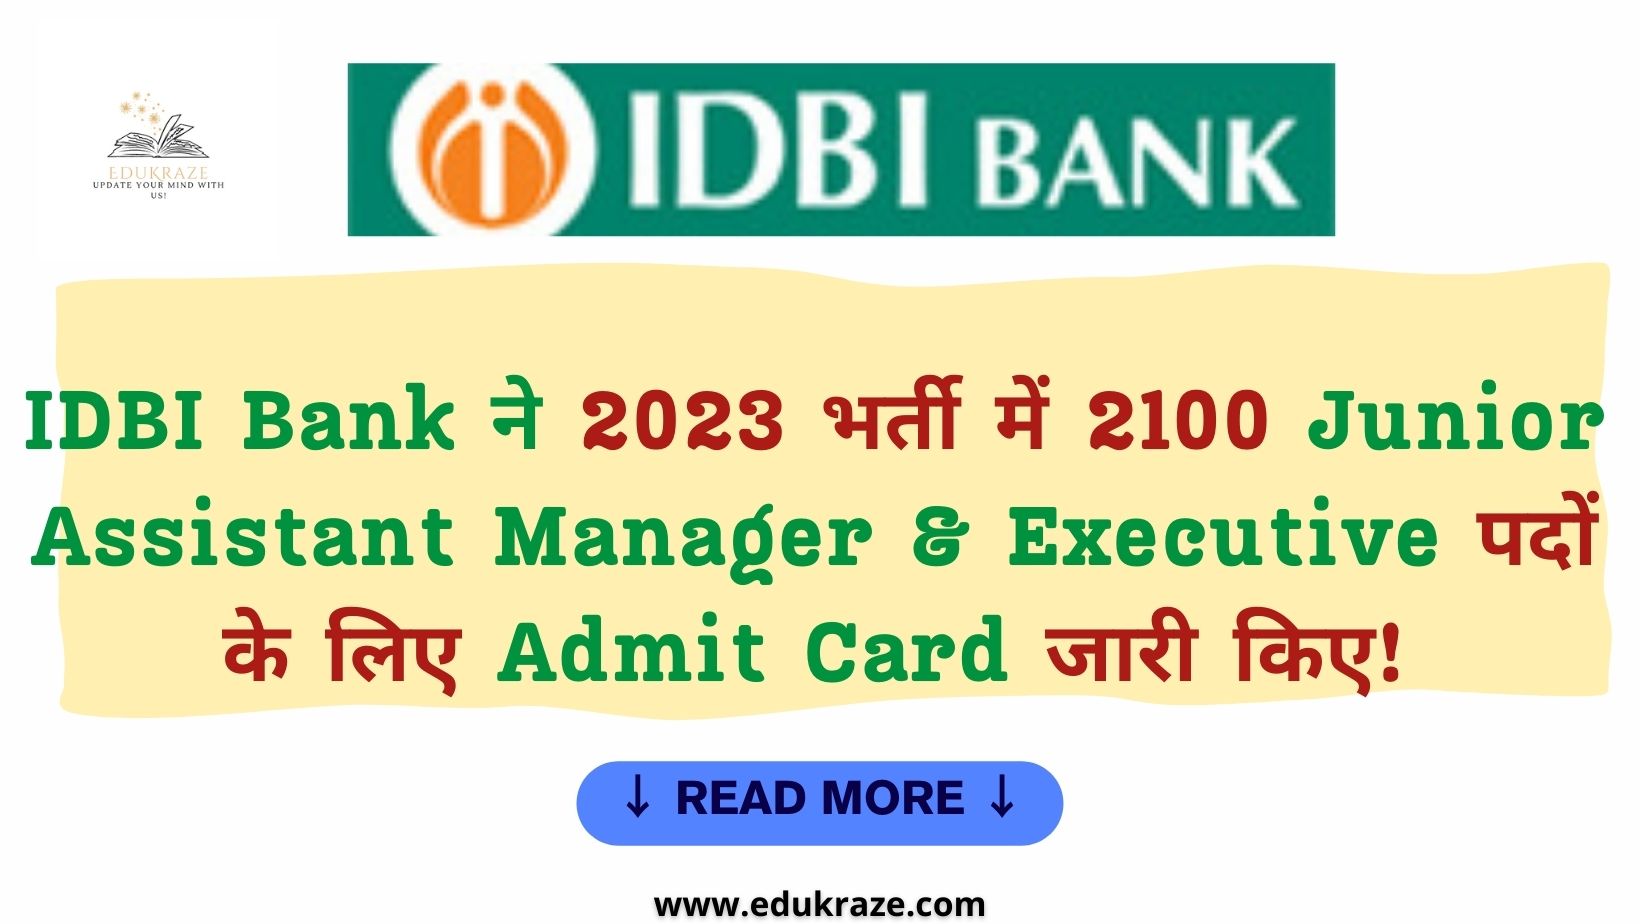 IDBI Bank Releases Admit Cards for Junior Assistant Manager (JAM) & Executive – Sales and Operations (ESO) Recruitment 2023